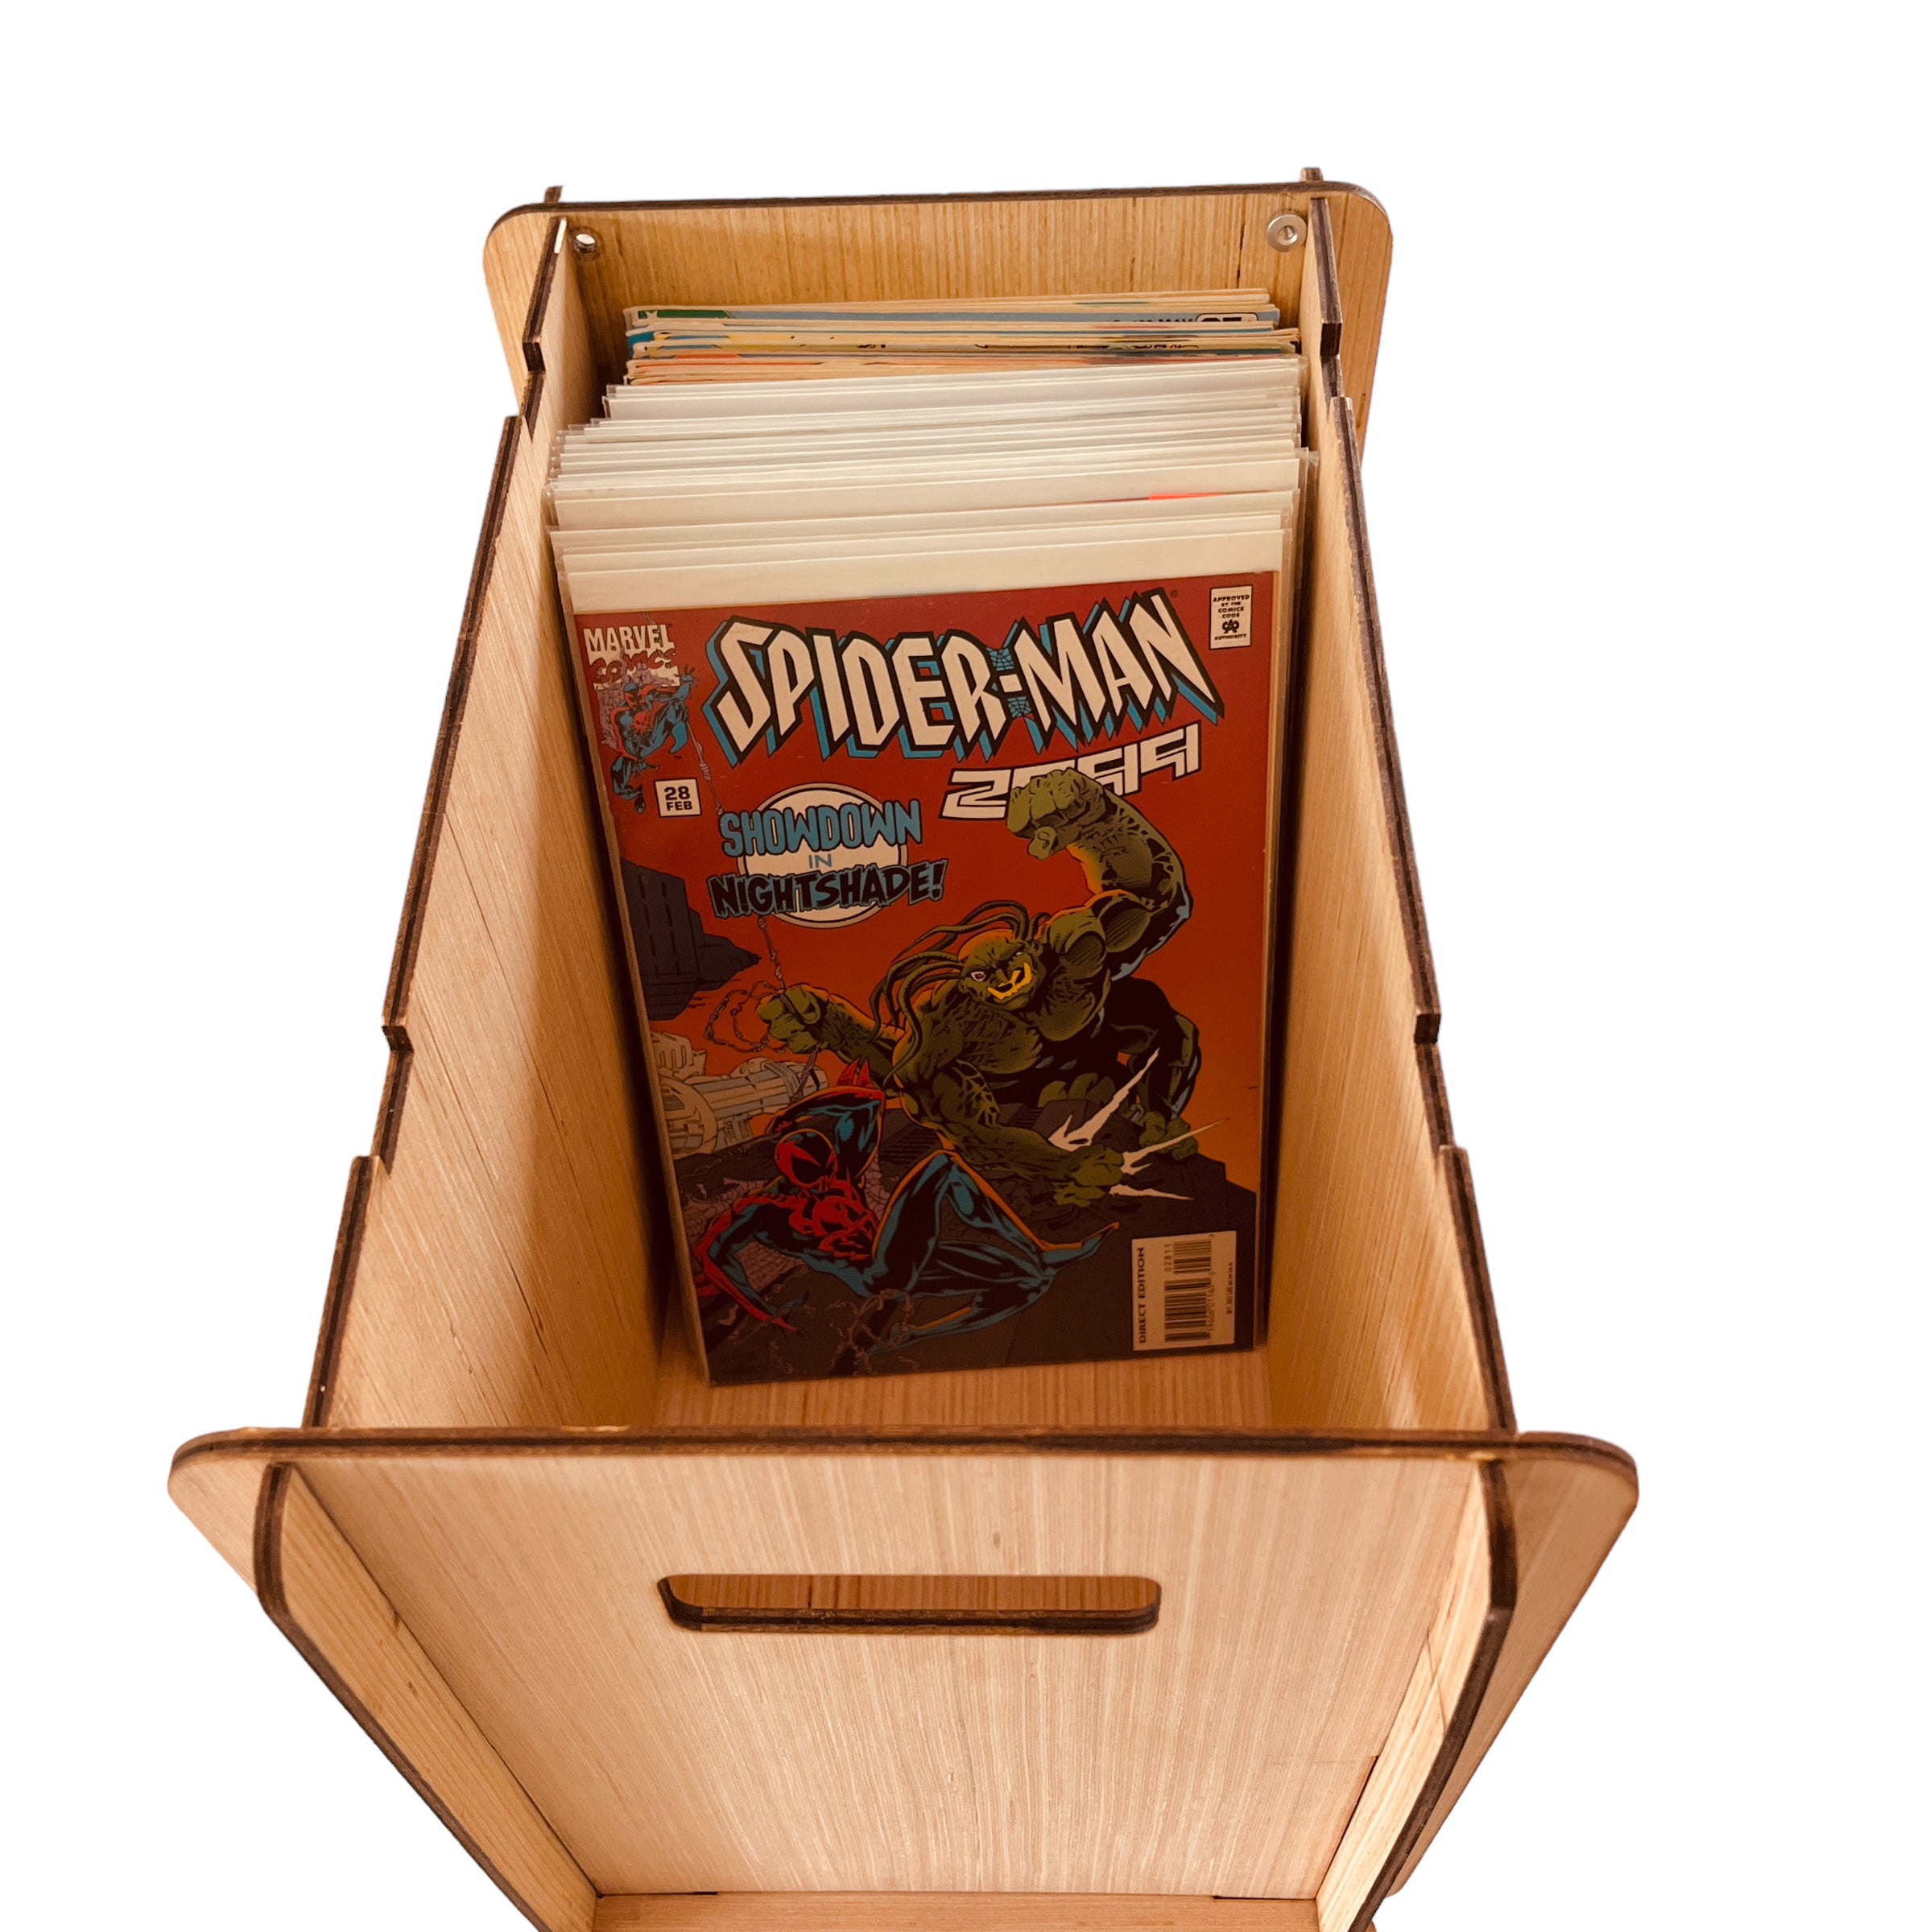 Wooden Comic Book Storage Box - Holds up to 170 Comic Books, Premium Wood  Top Loading Stackable Comic Book Bin, Includes a Comic Book Display Window